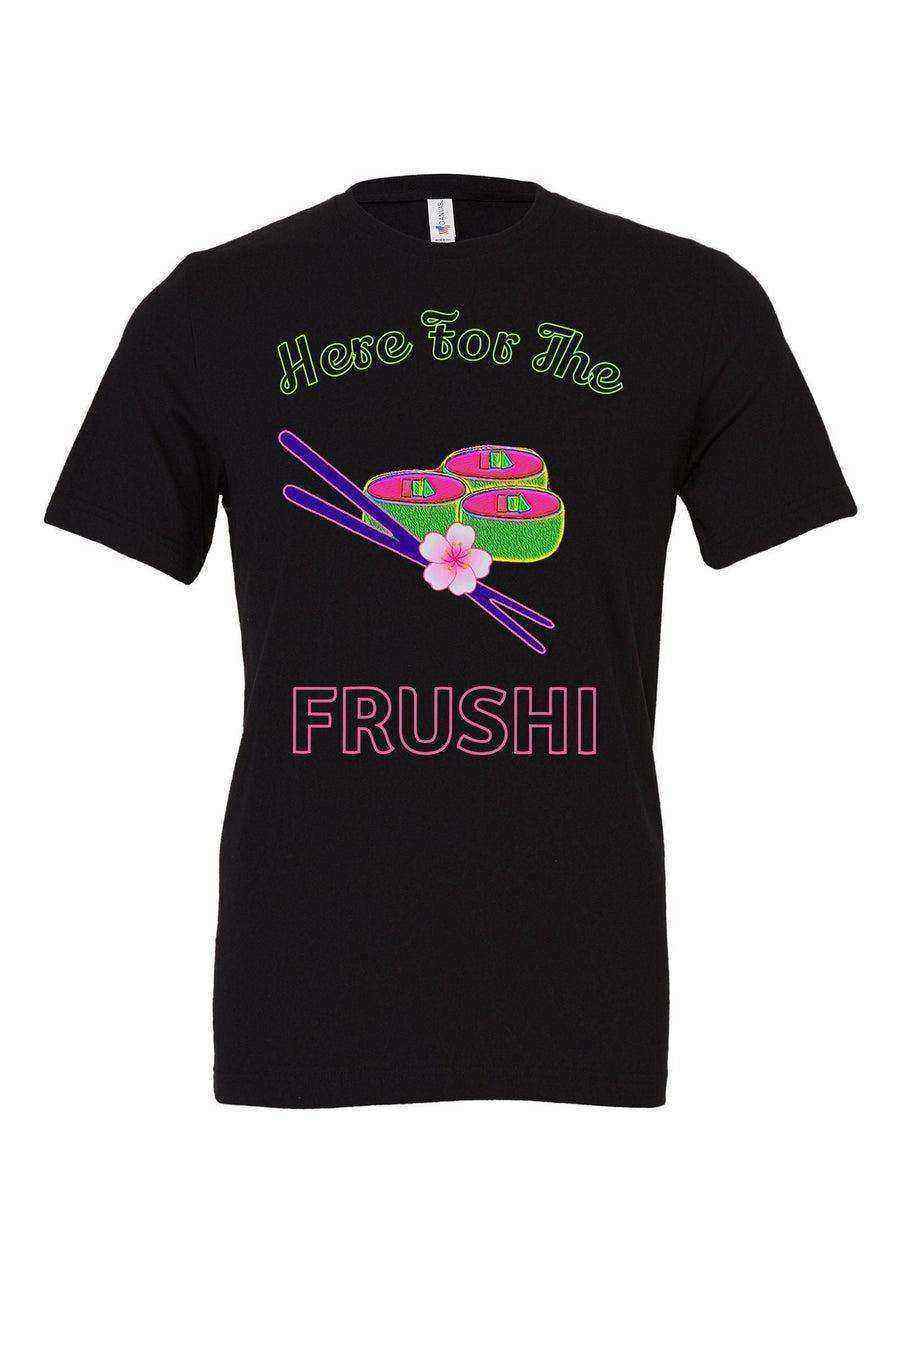 Toddler | Here For The Frushi Shirt | Flower and Garden - Dylan's Tees